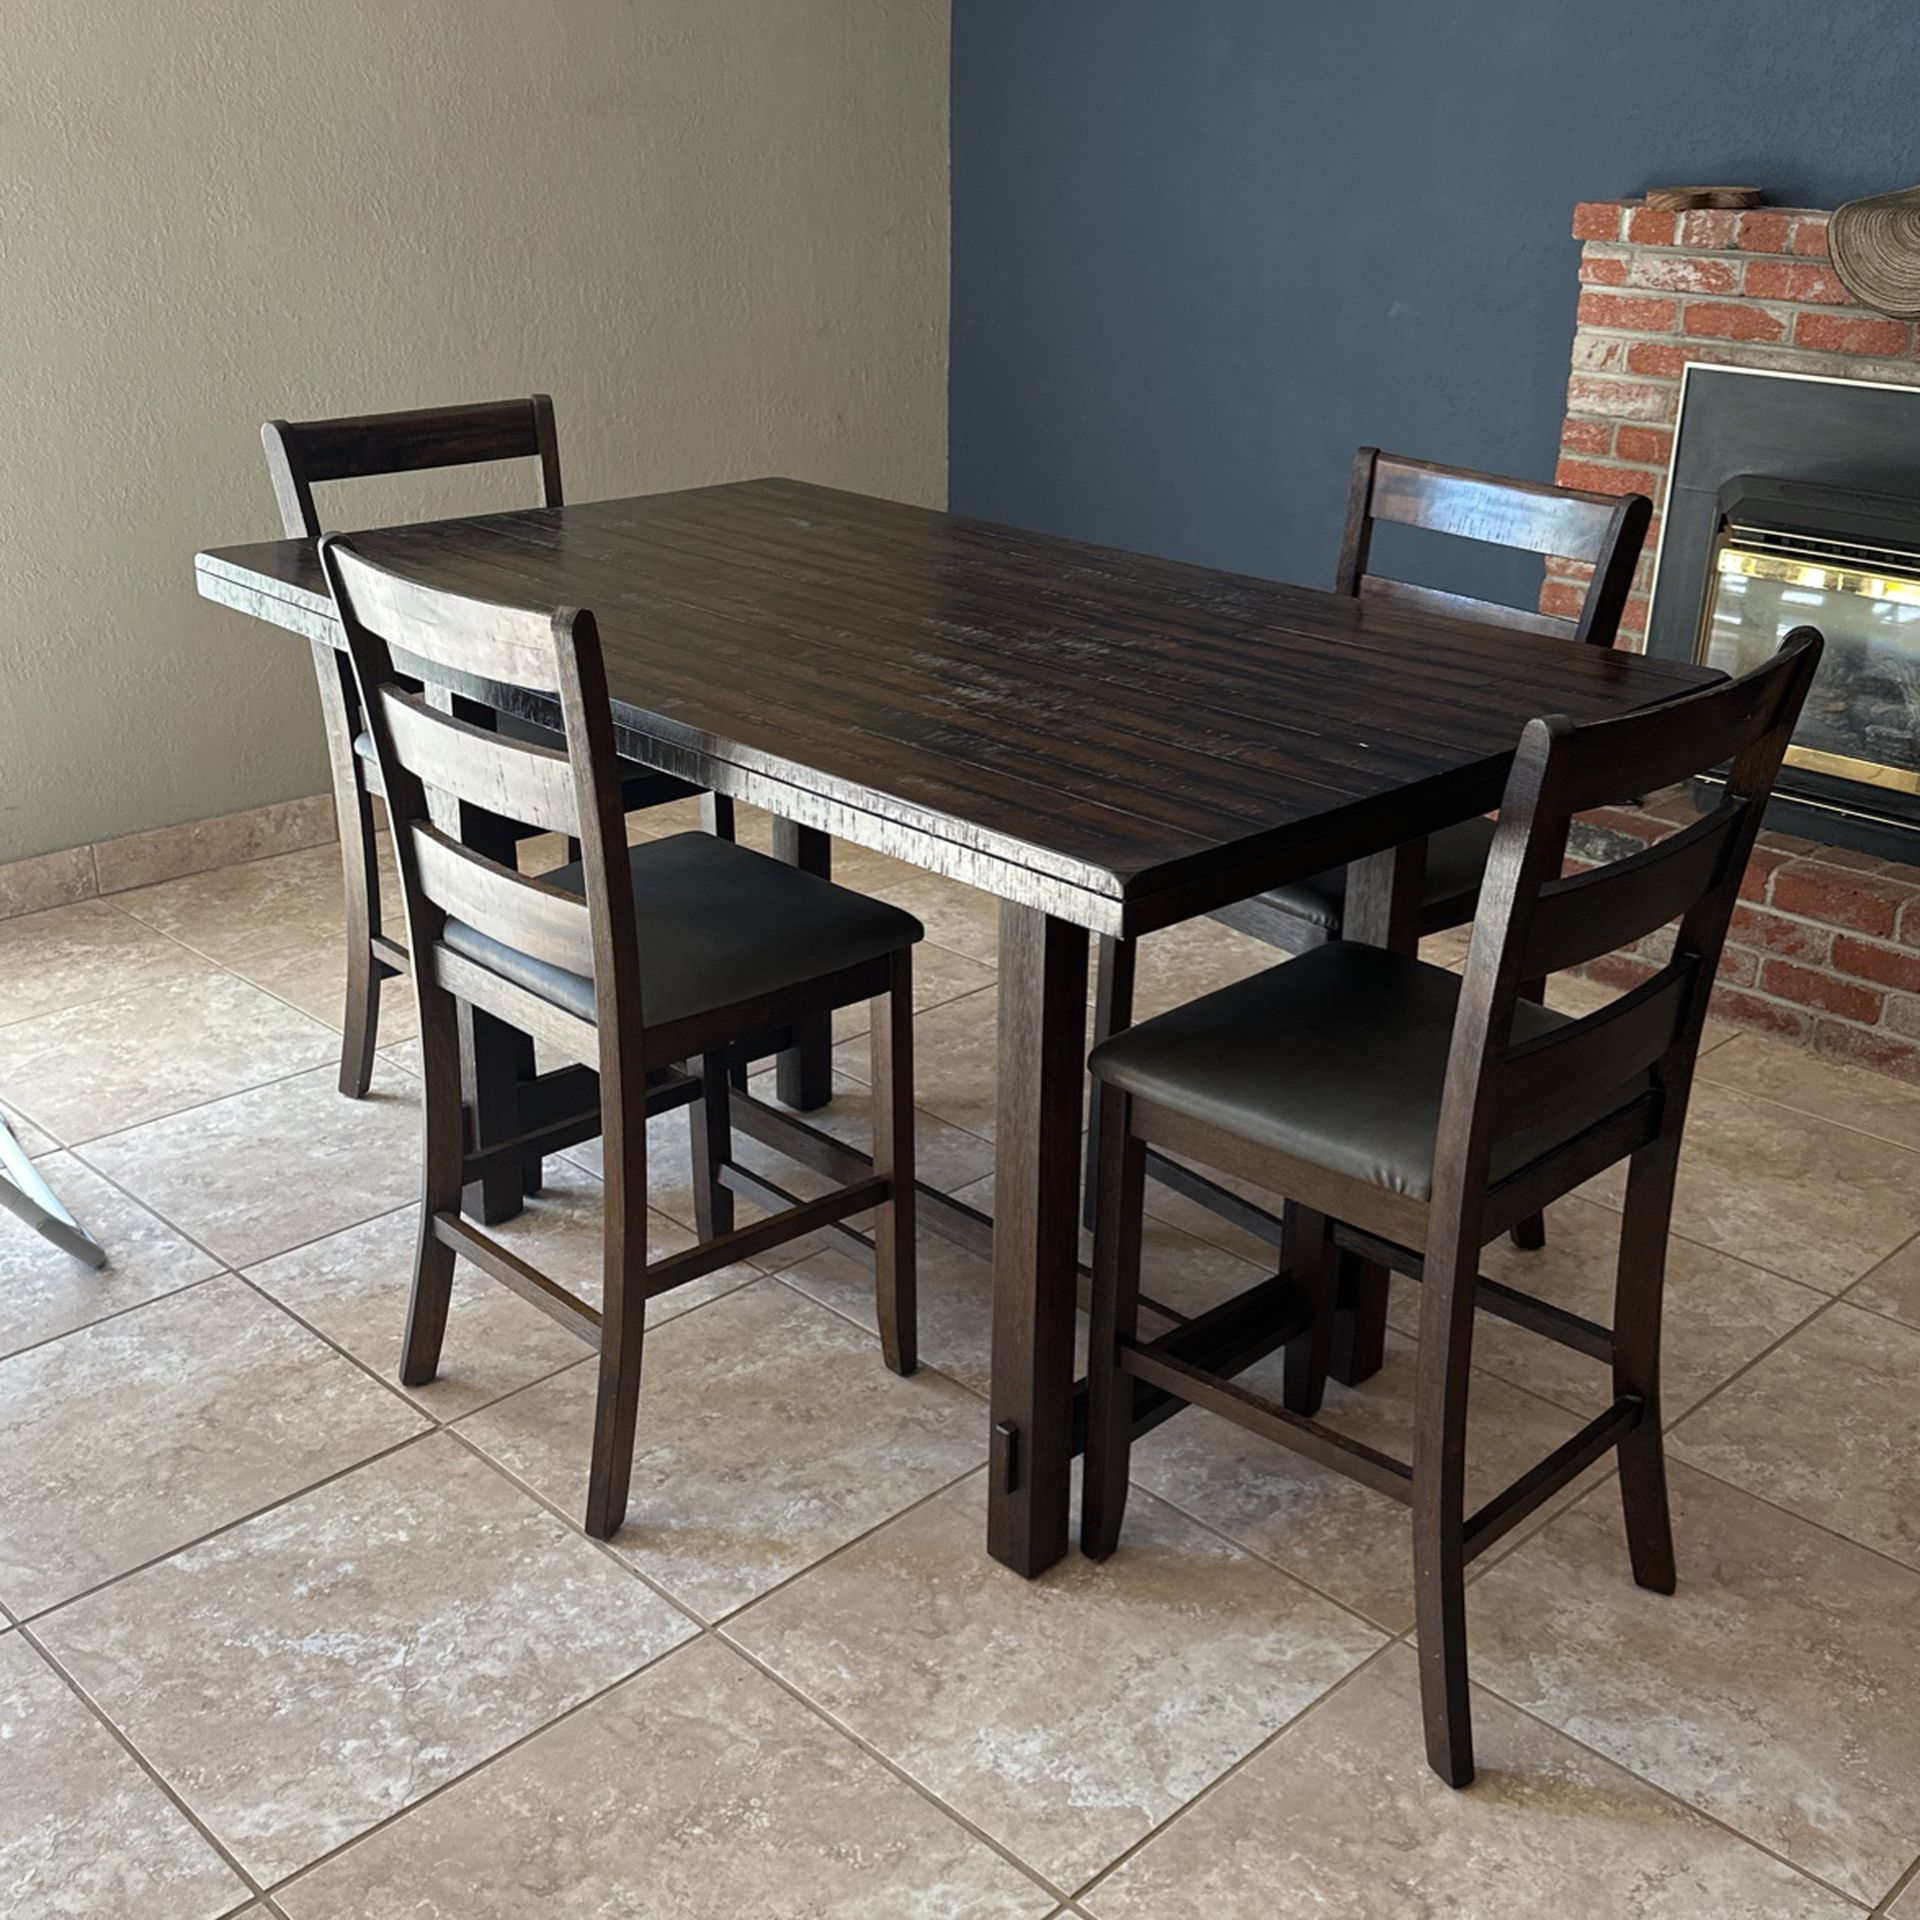 Kitchen table + 4 Chairs $100 If Gone By Tomorrow 